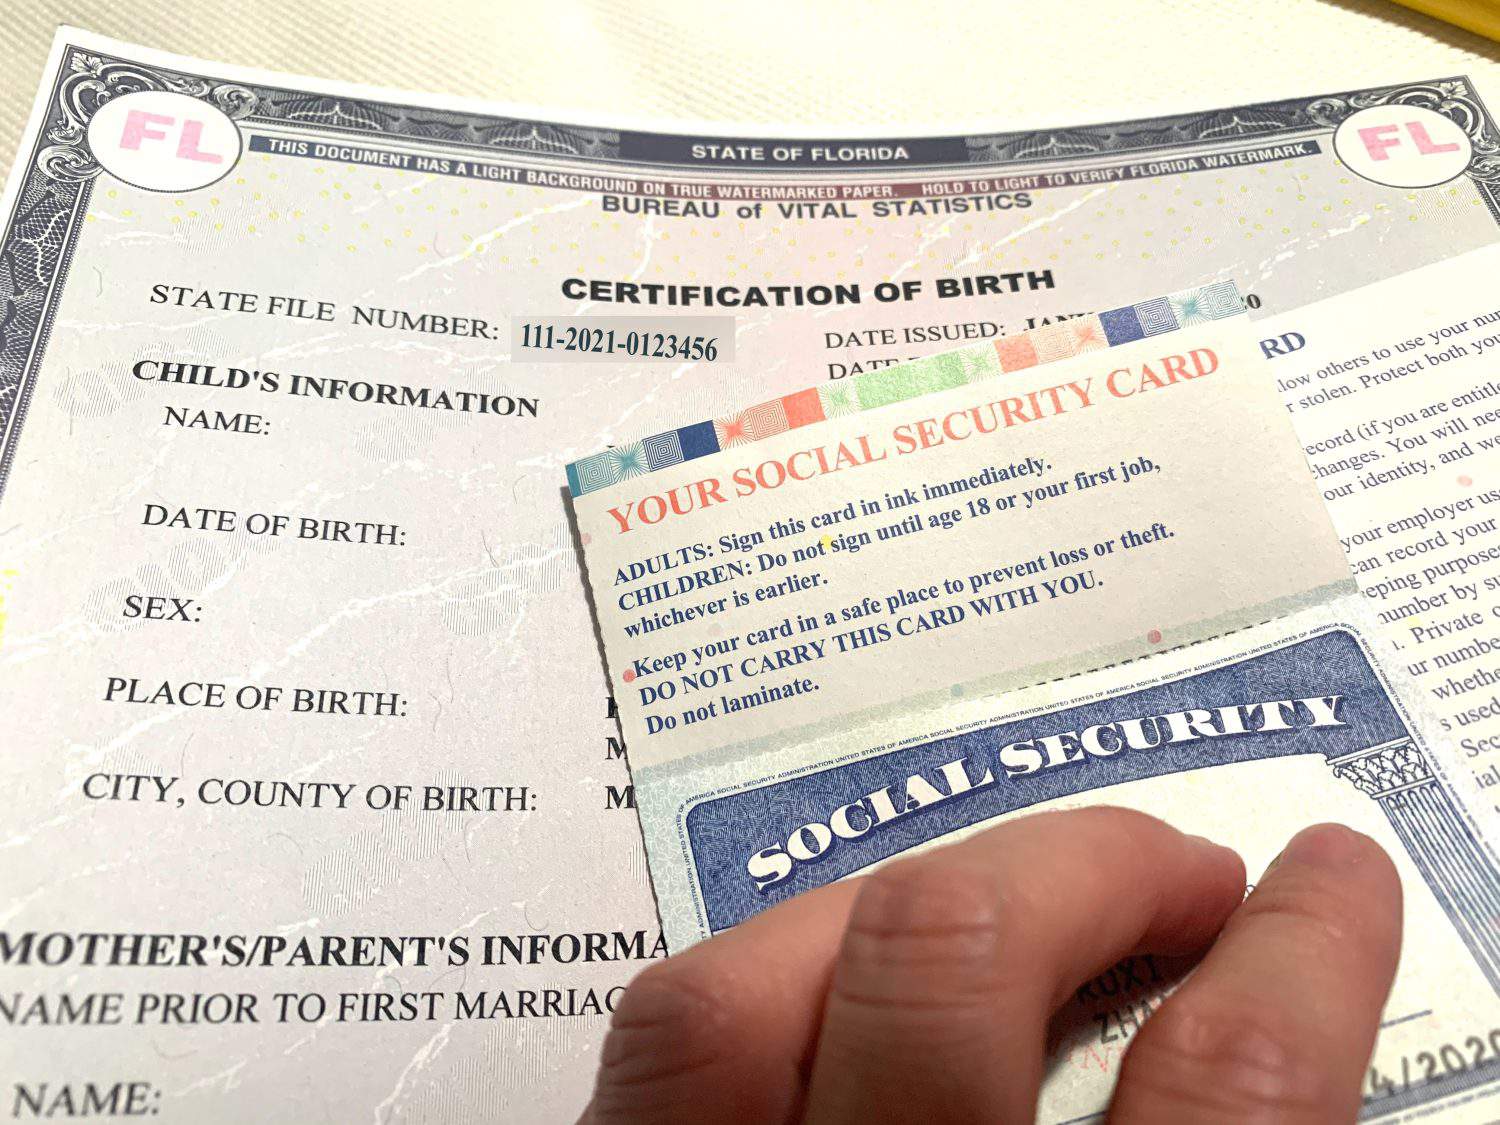 Birth certificate and social security card